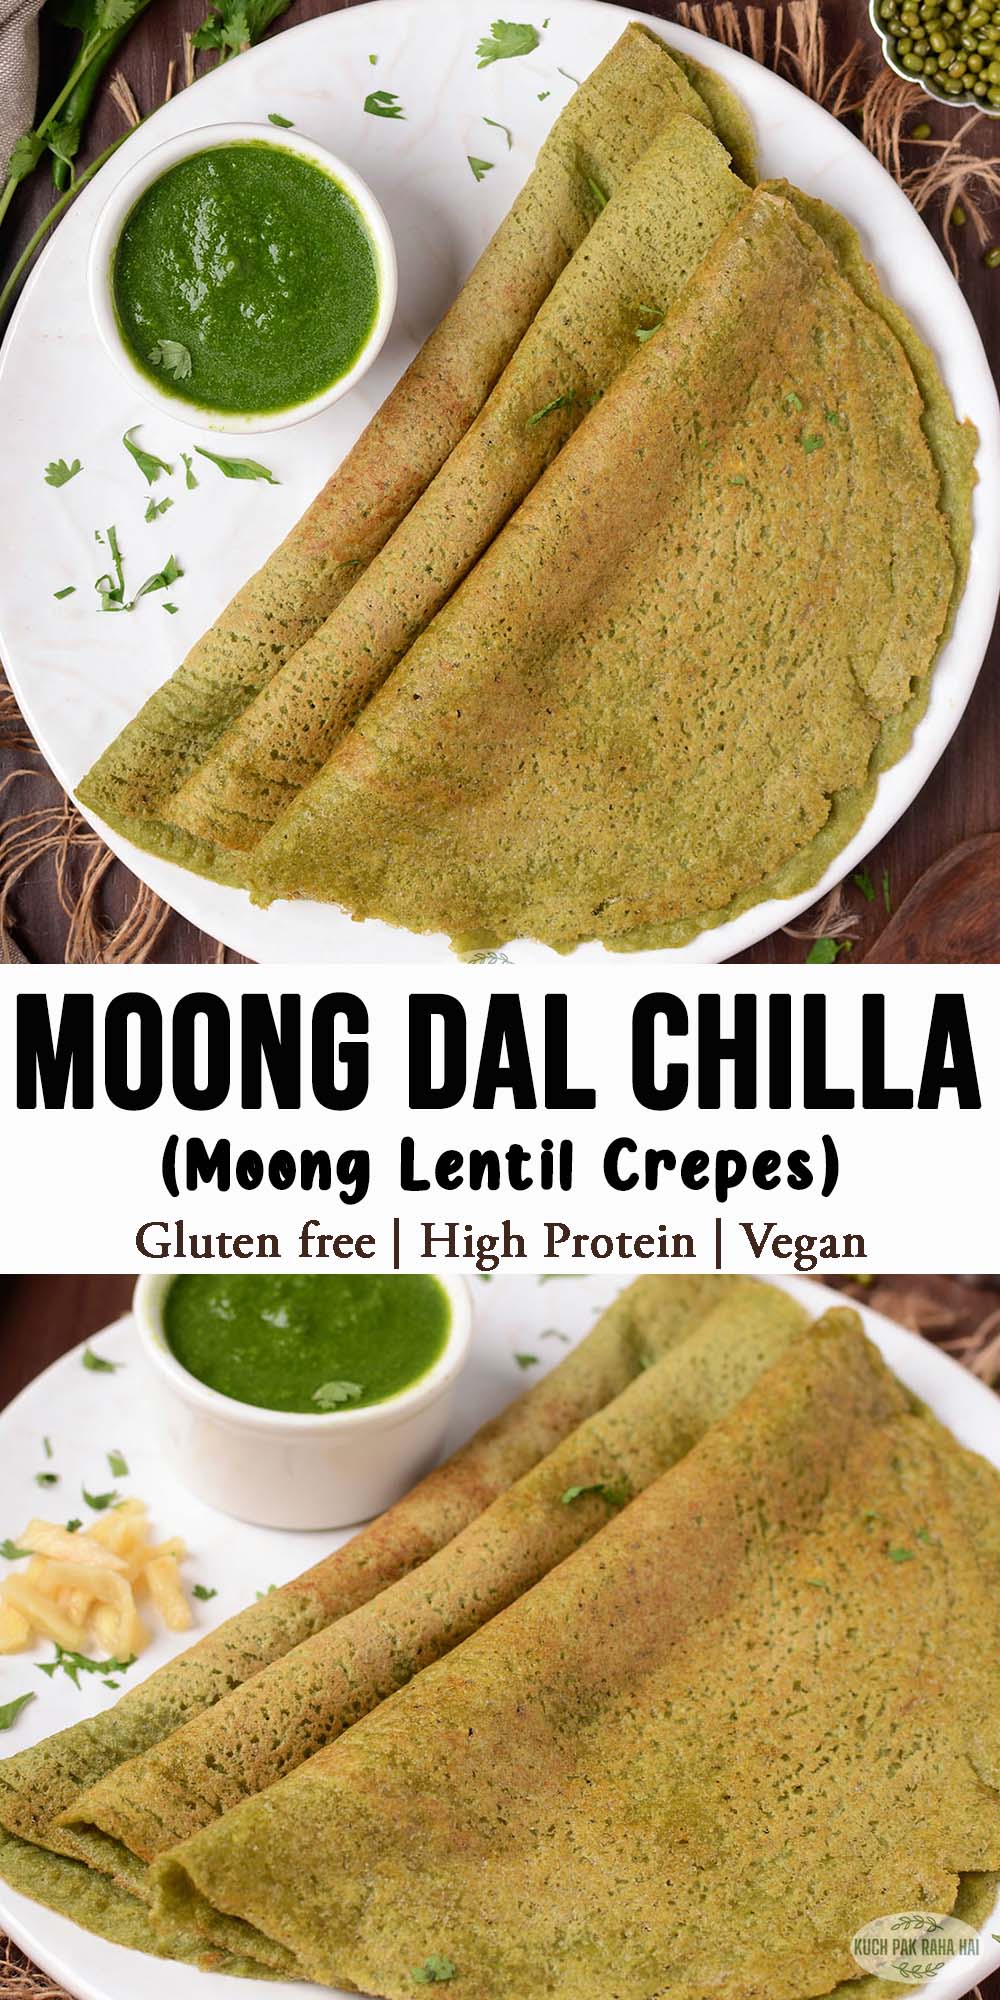 Moong Dal chilla or Indian lentil crepes made with whole mung beans.